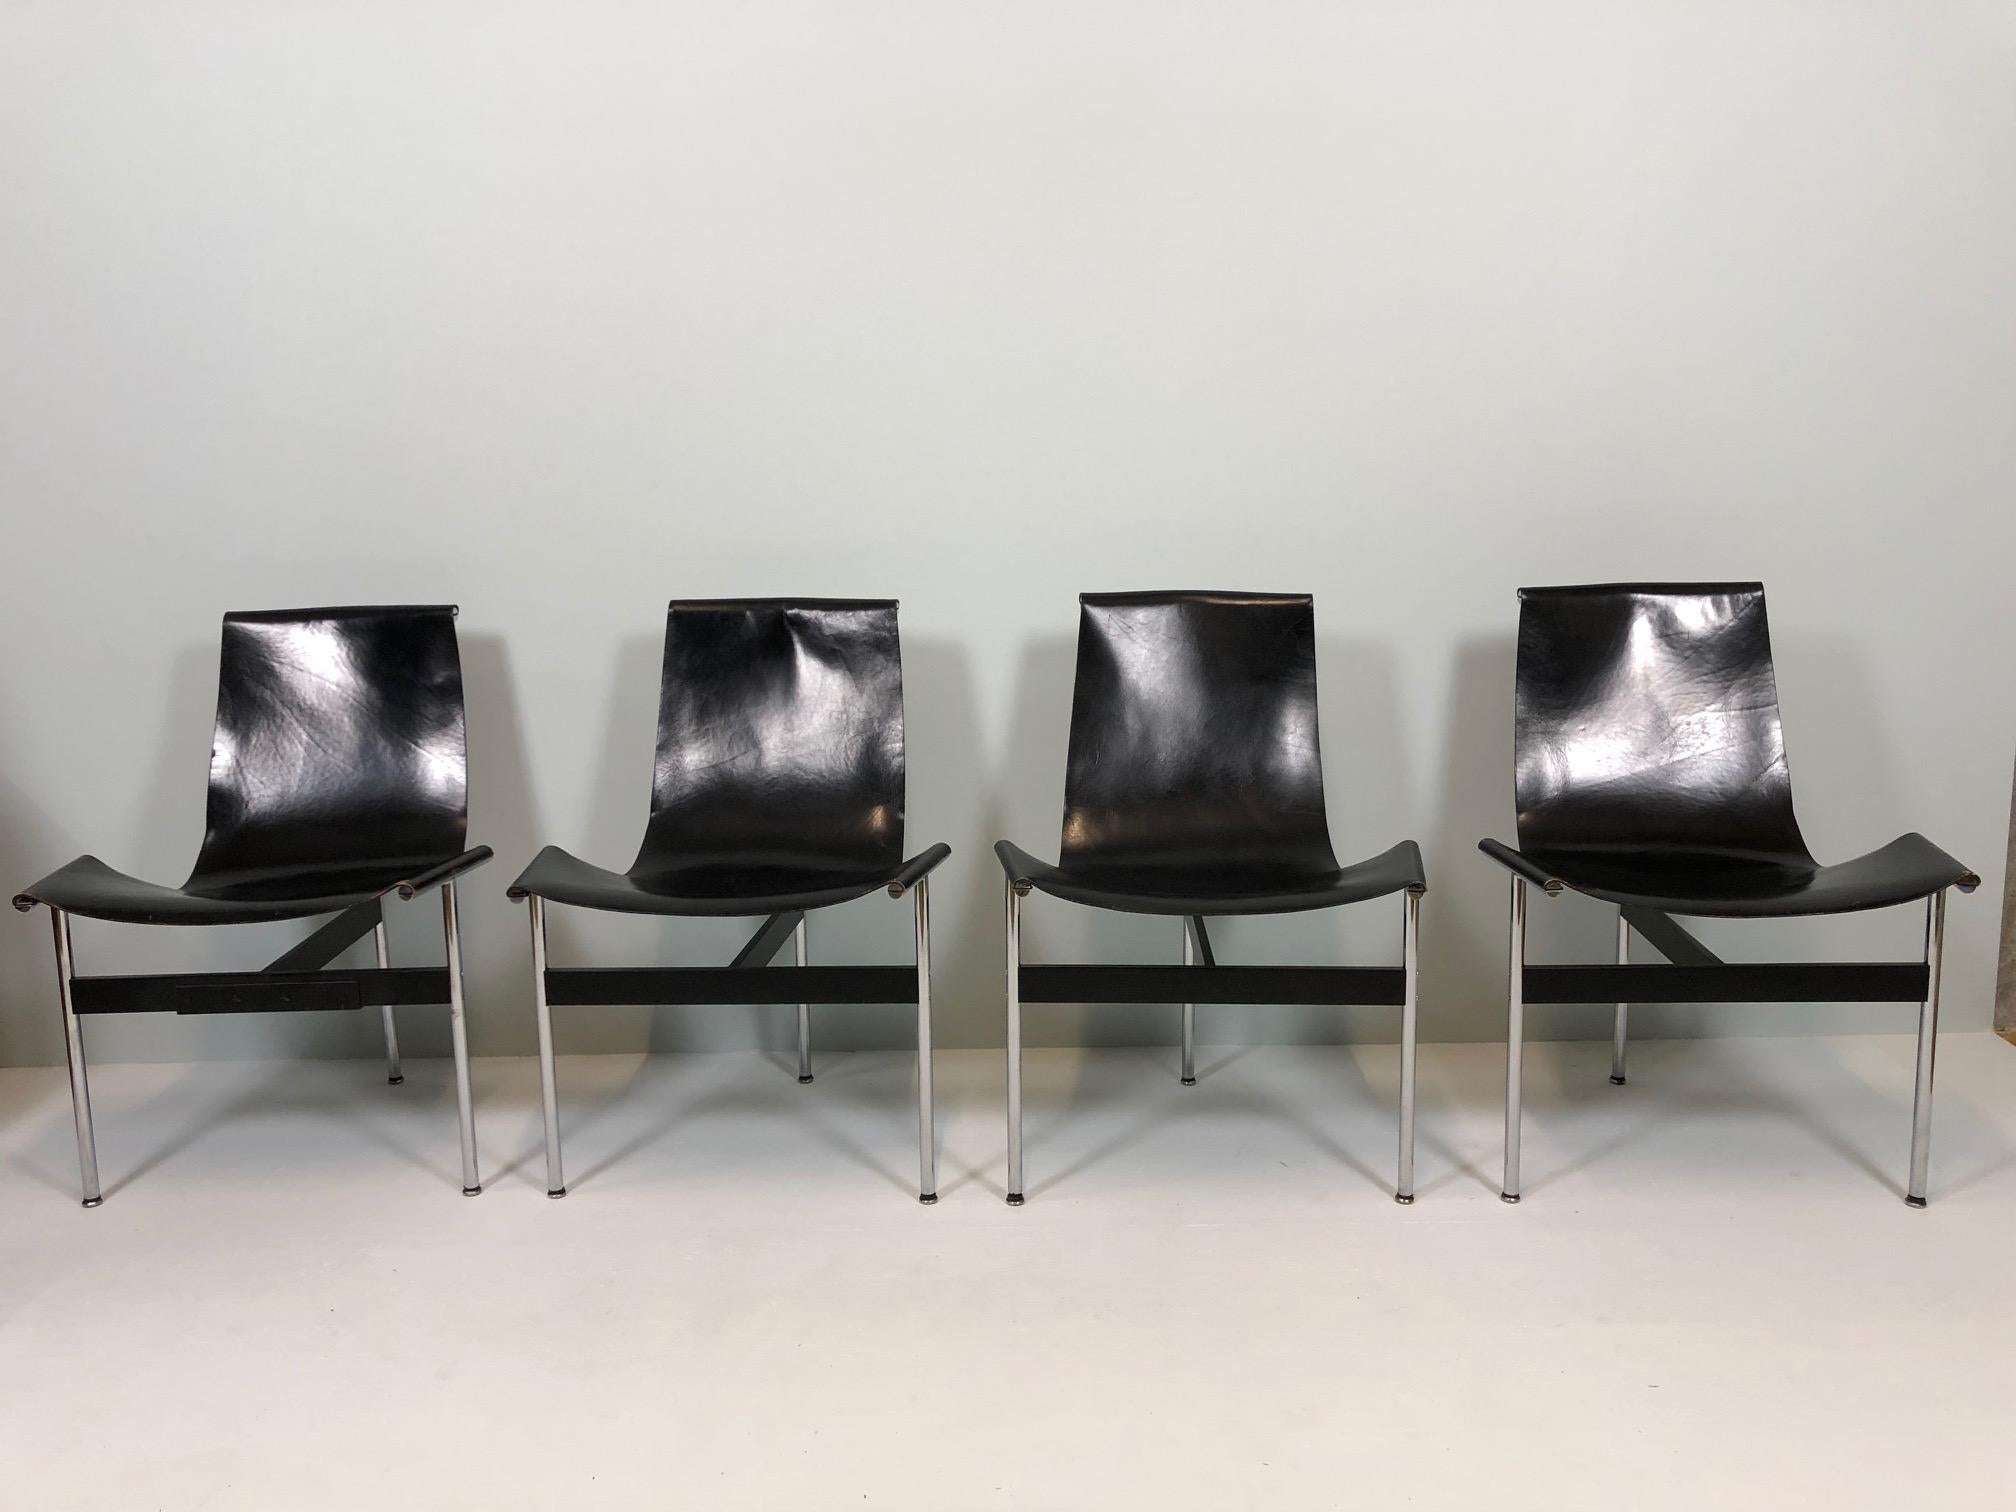 Set of four T-chairs designed in 1952 by William Katavolos, Douglas Kelly & Ross Littel. These examples were made by ICF.

Chromed and enameled steel T frames supporting black leather slings. A very elegant and comfortable set of dining